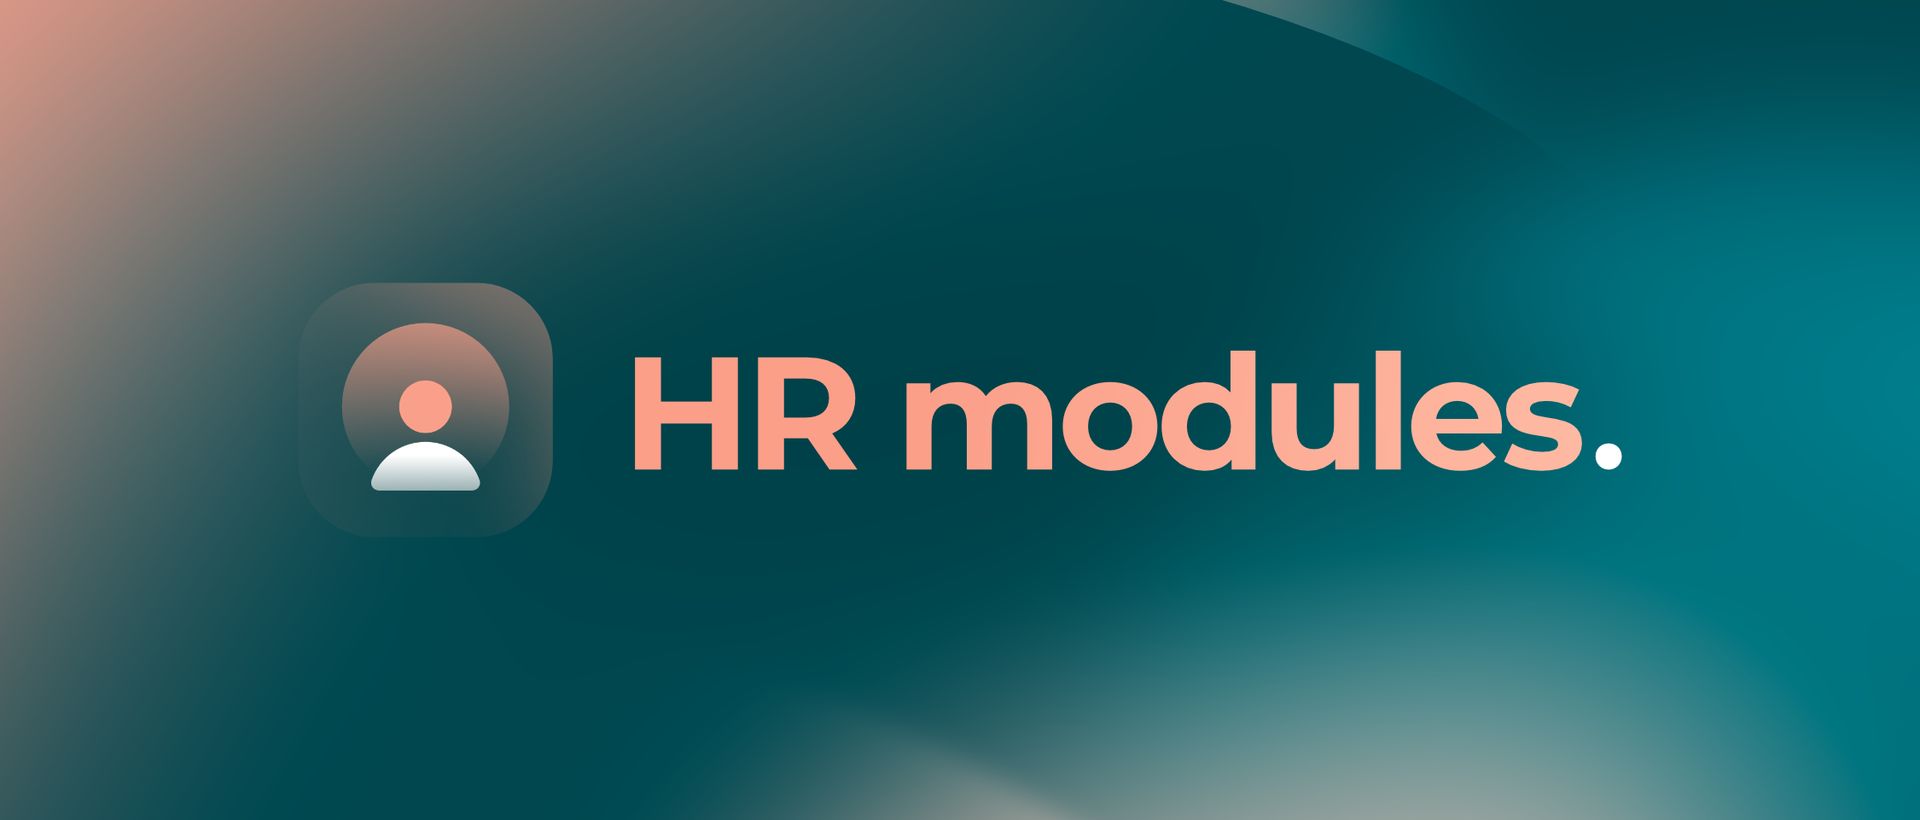 New HR modules in the scheduling software Agendrix